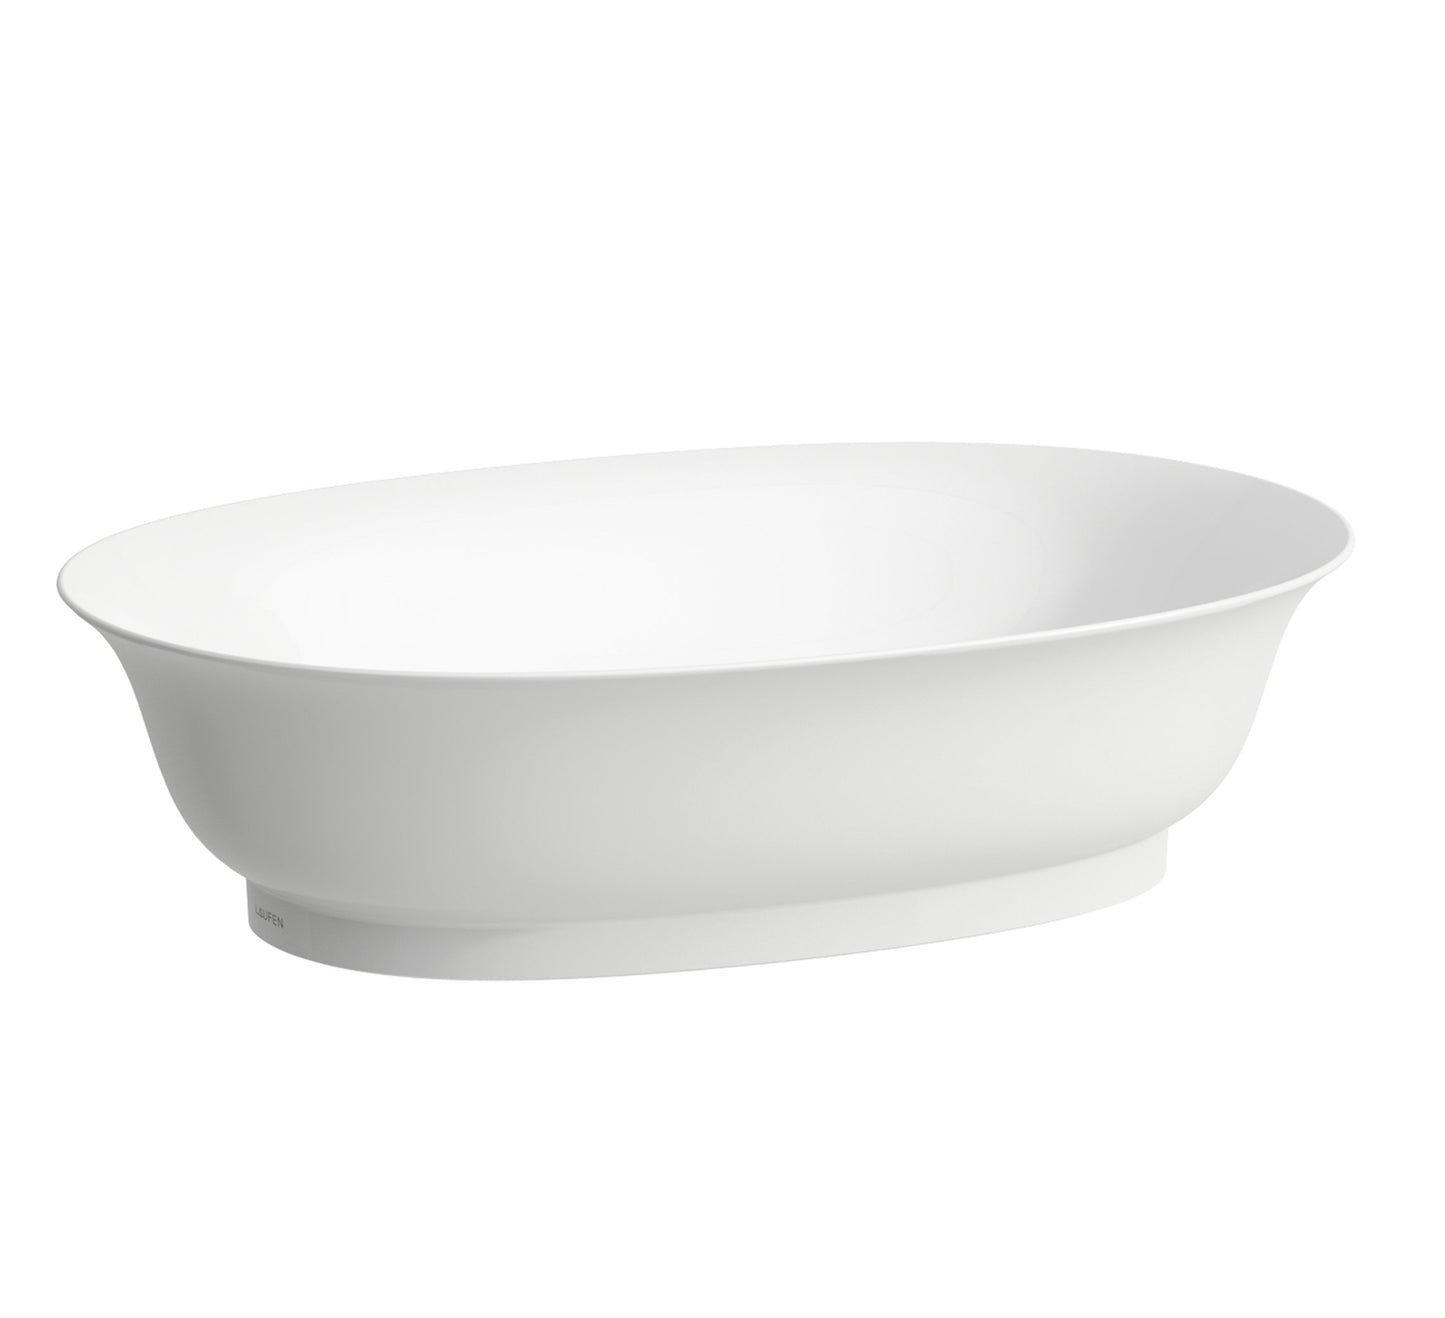 LAUFEN THE NEW CLASSIC WASHBASIN BOWL WITHOUT OVERFLOW, WITH NO TAPHOLE SIZE: 55 X 38 CM WHITE - 8.1285.2.000.112.1 - Tadmur Trading